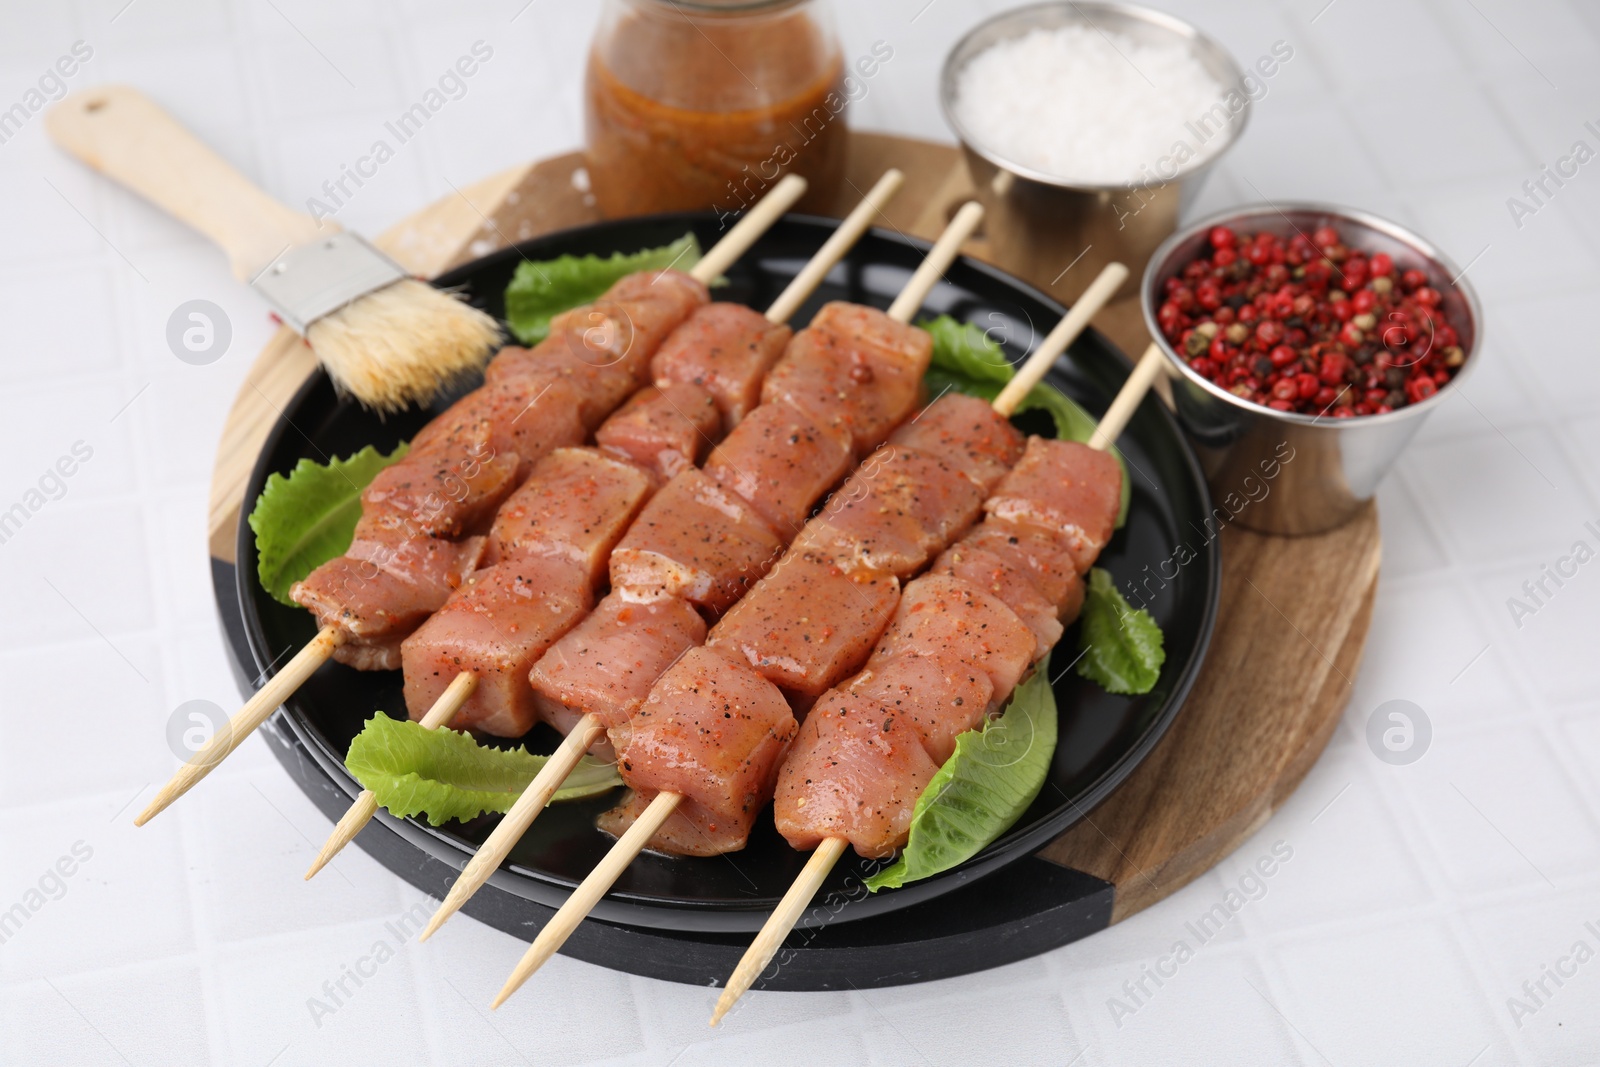 Photo of Wooden skewers with cut raw marinated meat, spices and basting brush on white tiled table